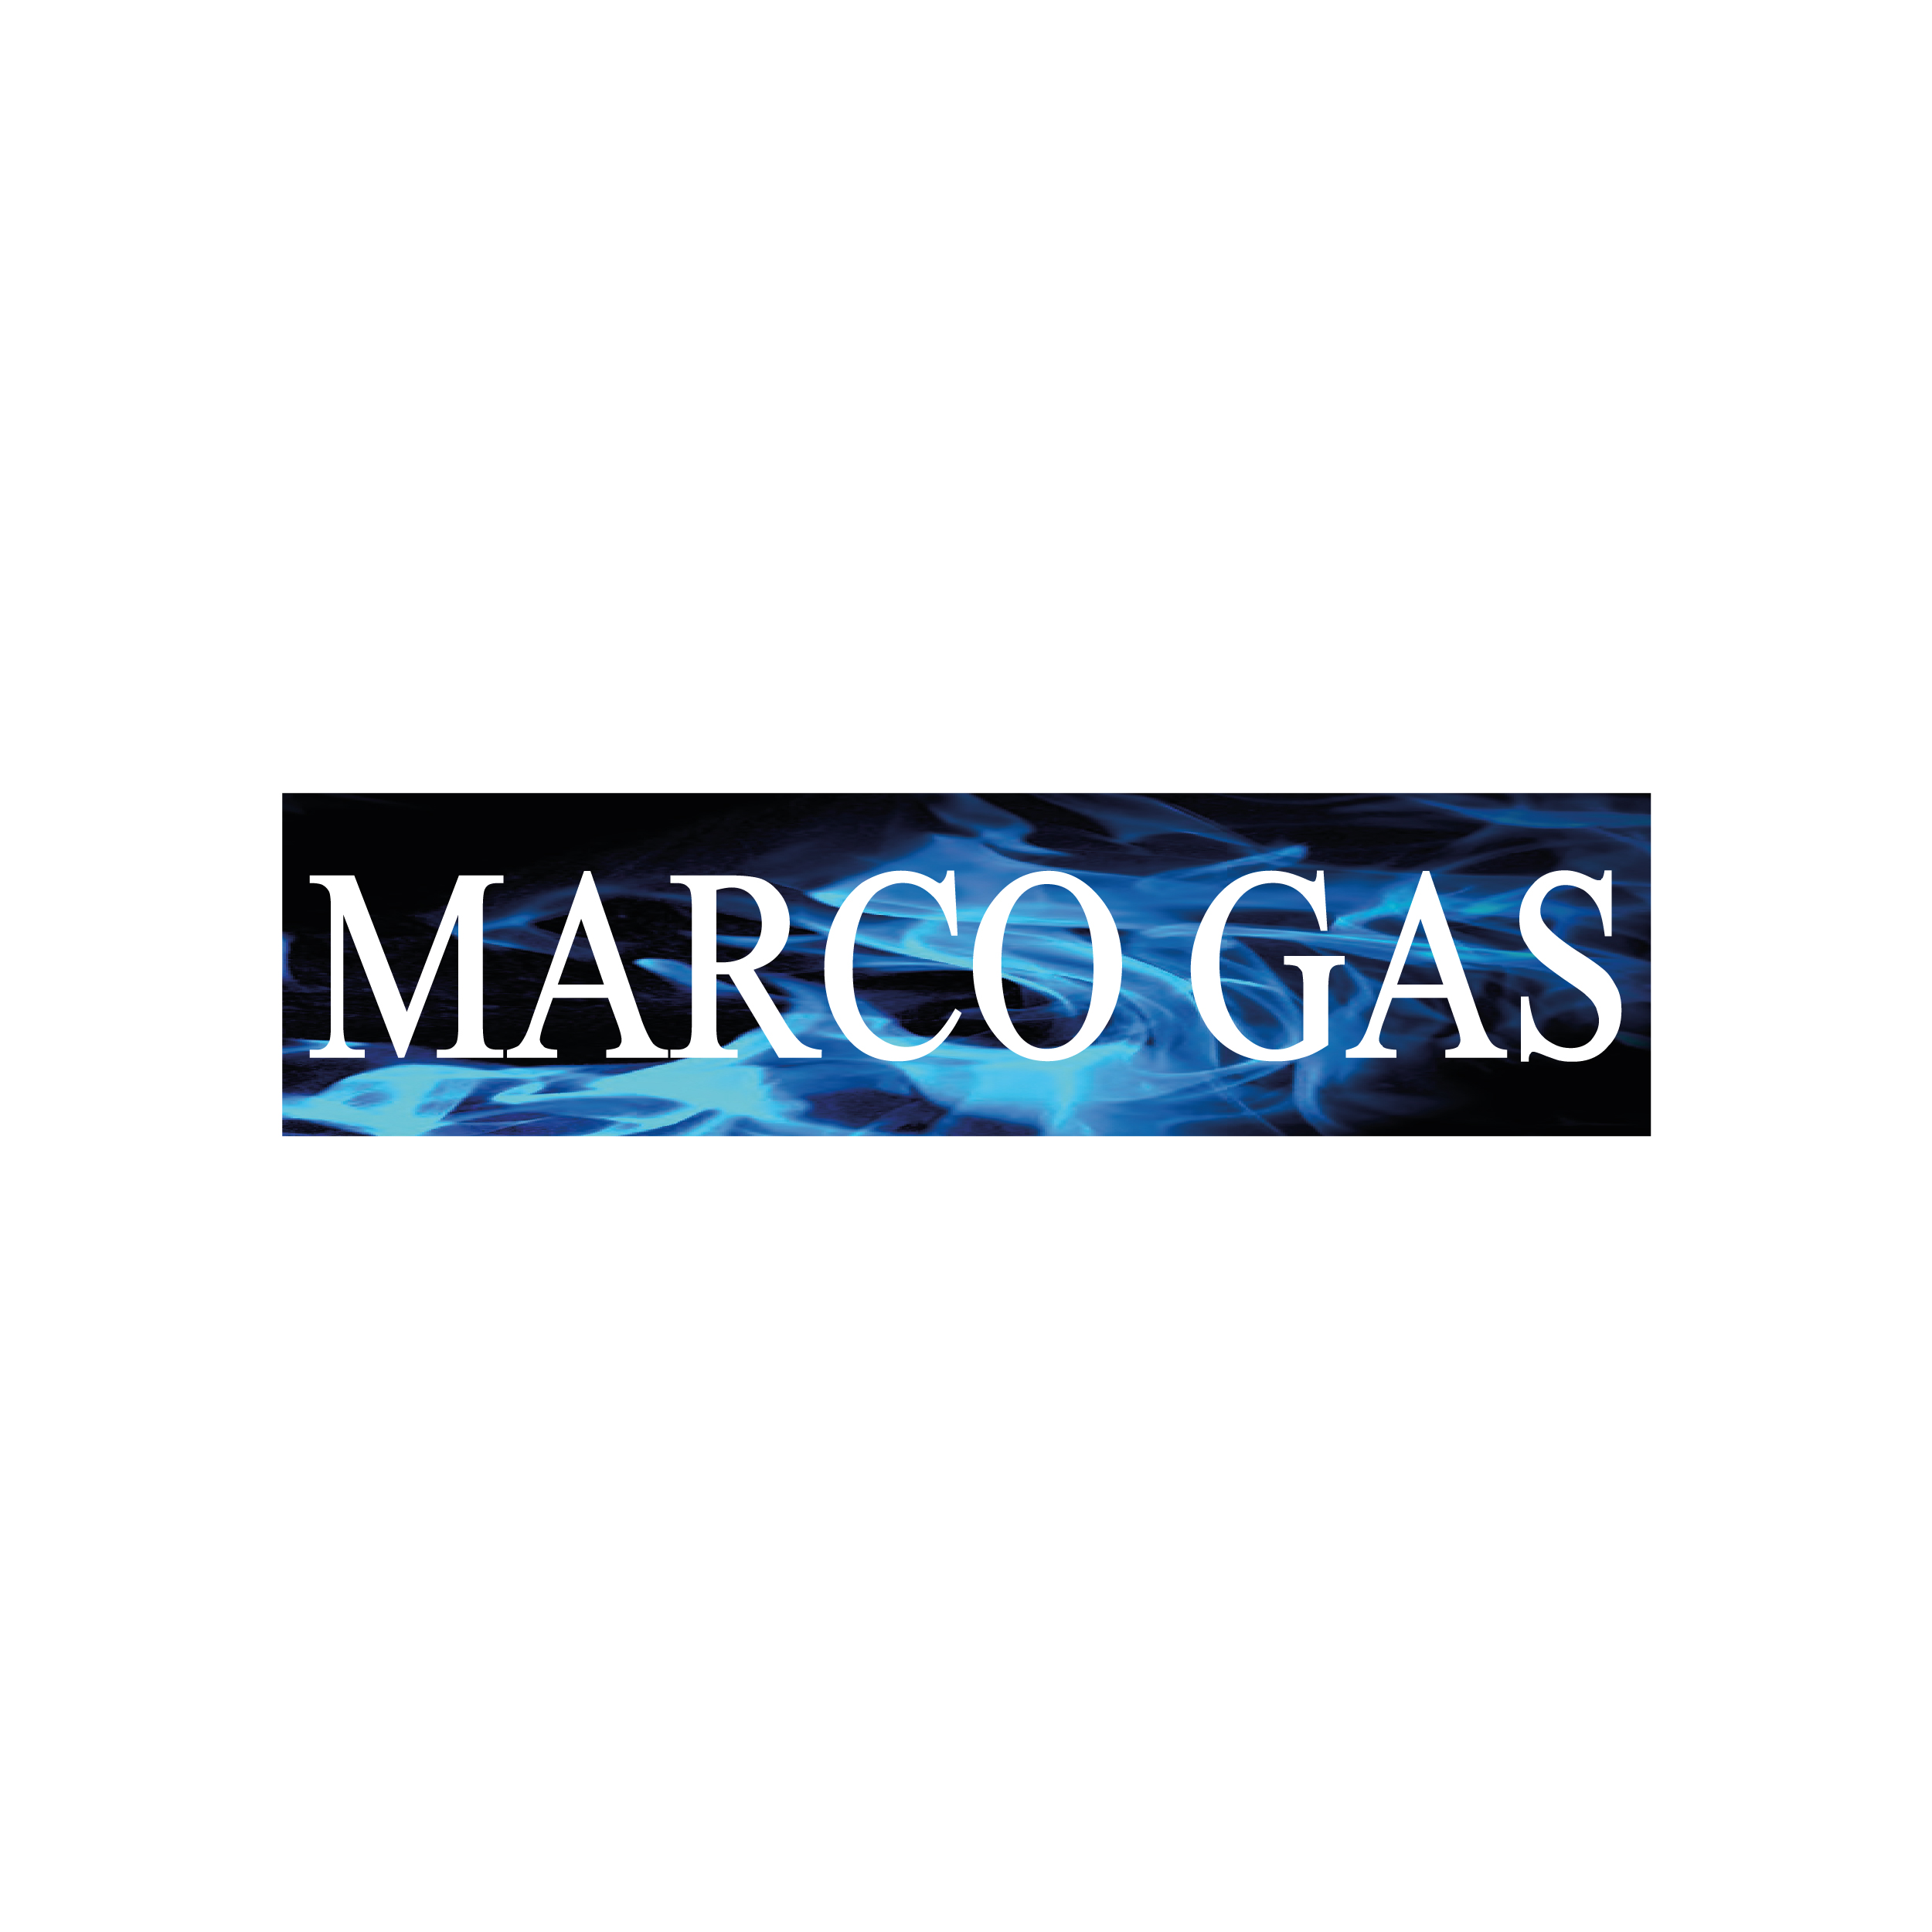 Marco gas